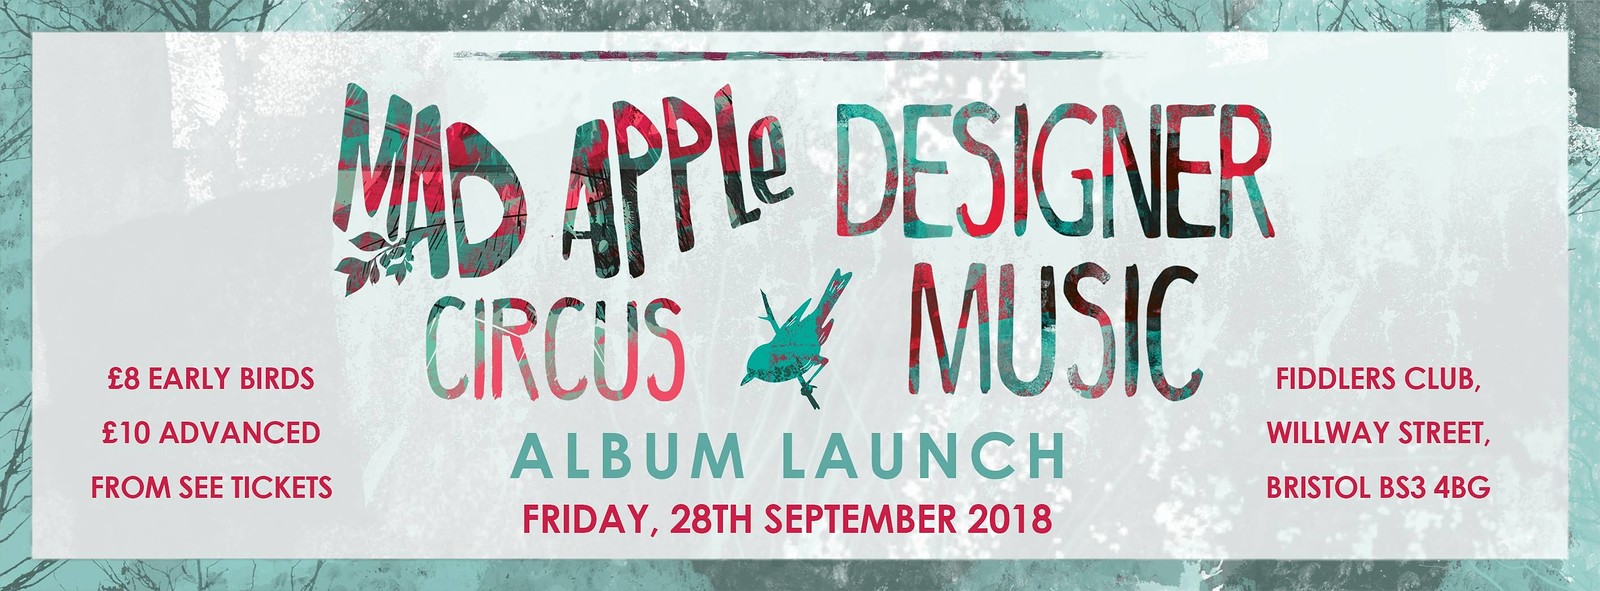 Mad Apple Circus - Album Launch at Fiddlers